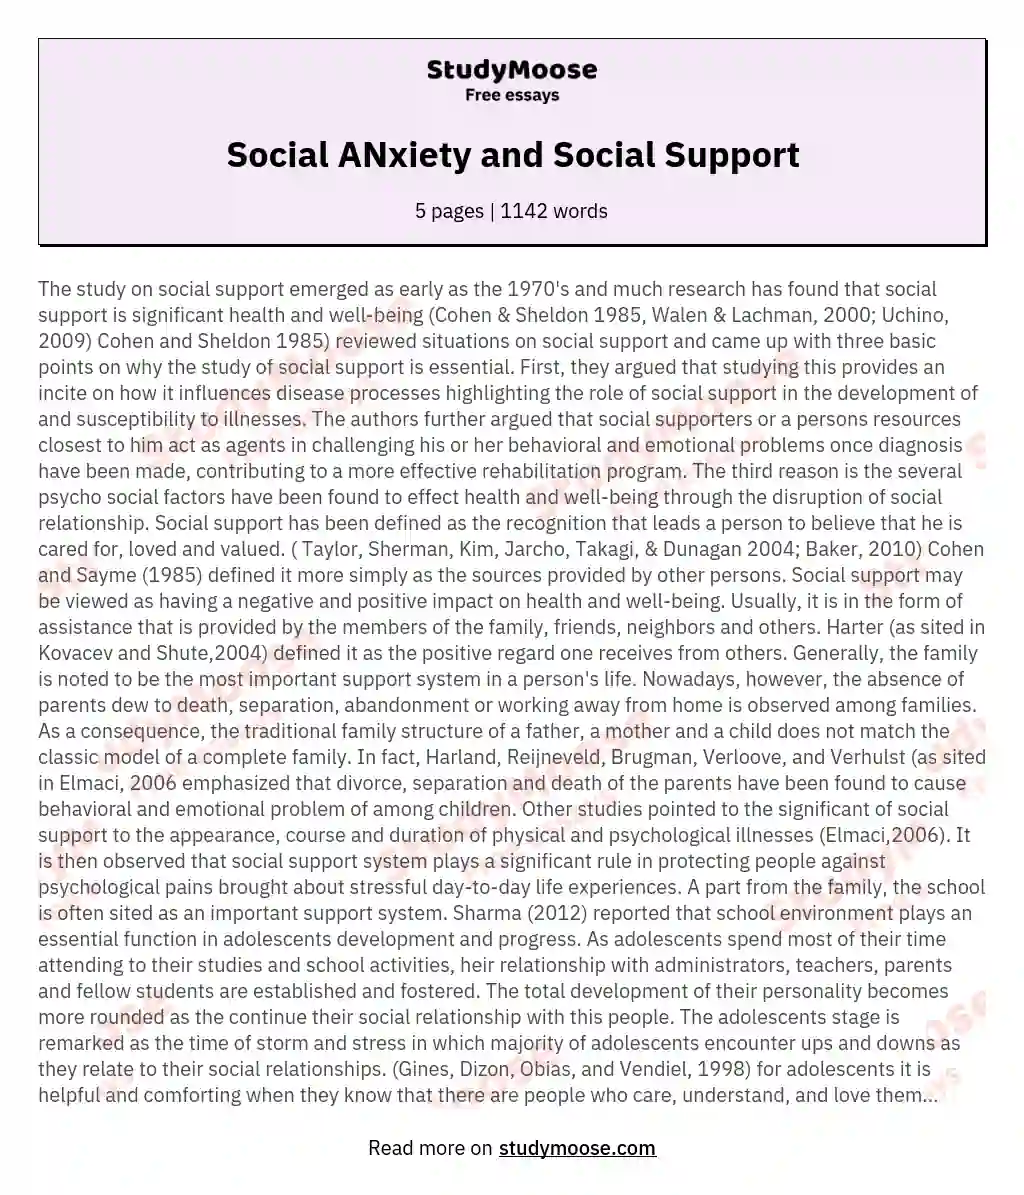 Social ANxiety and Social Support